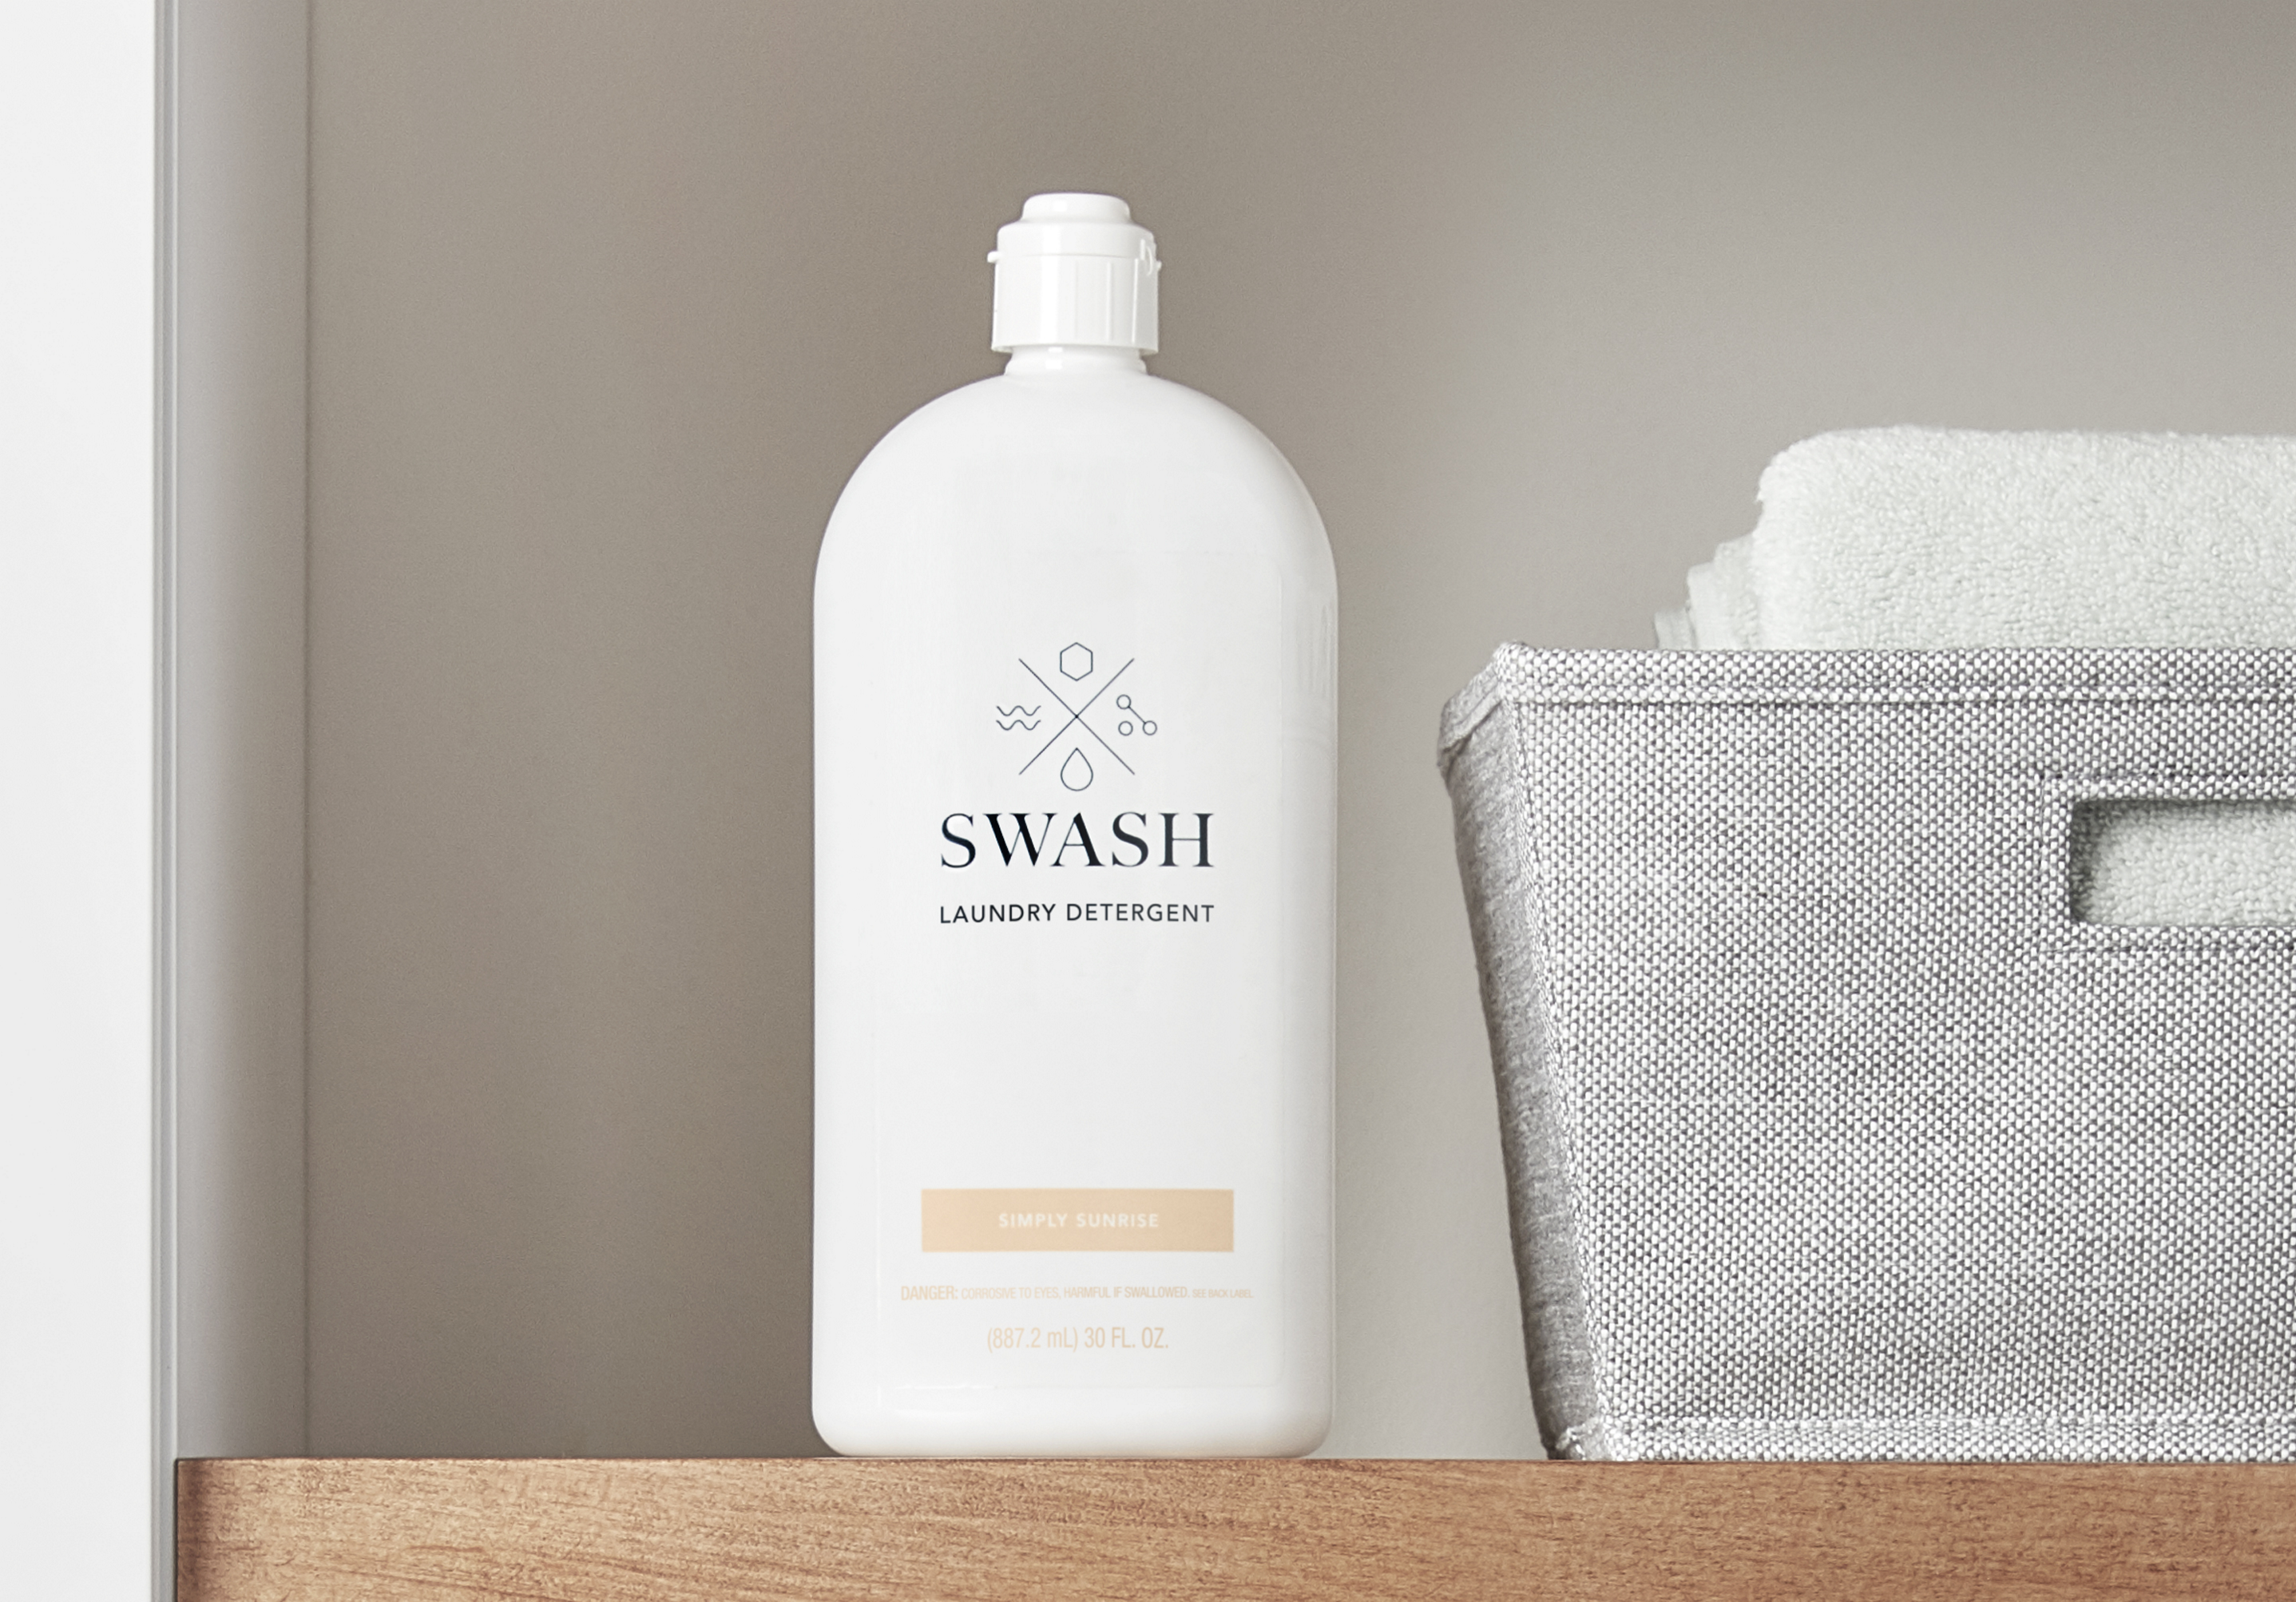 Swash Simply Sunrise Laundry Detergent on a wooden shelf in a laundry room next to towels and other laundry supplies